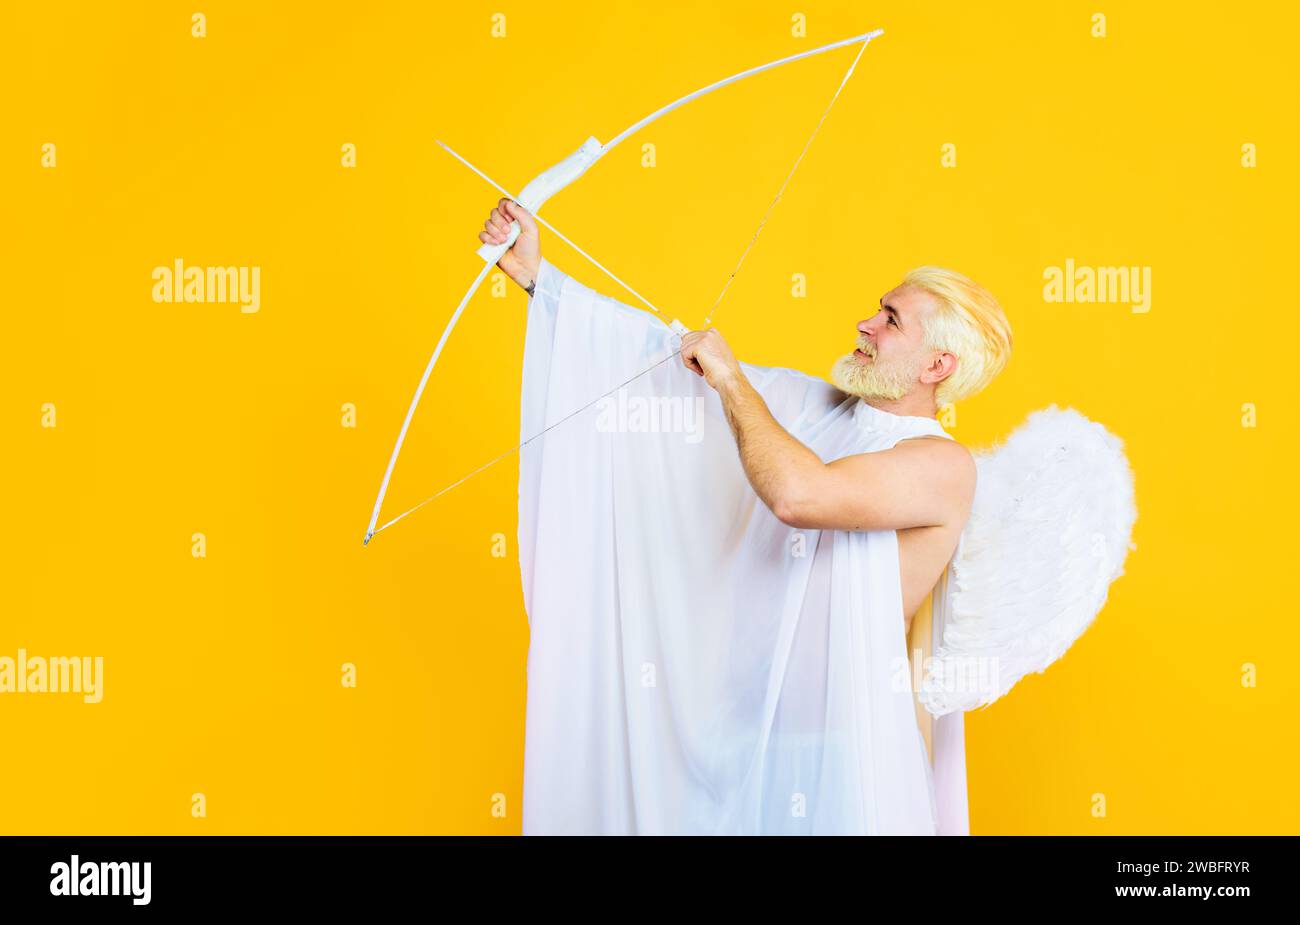 Valentines Day celebration. Cupid man in white angel wings with bow and arrow. God of love. Valentines day cupid angel shooting arrows of love Stock Photo